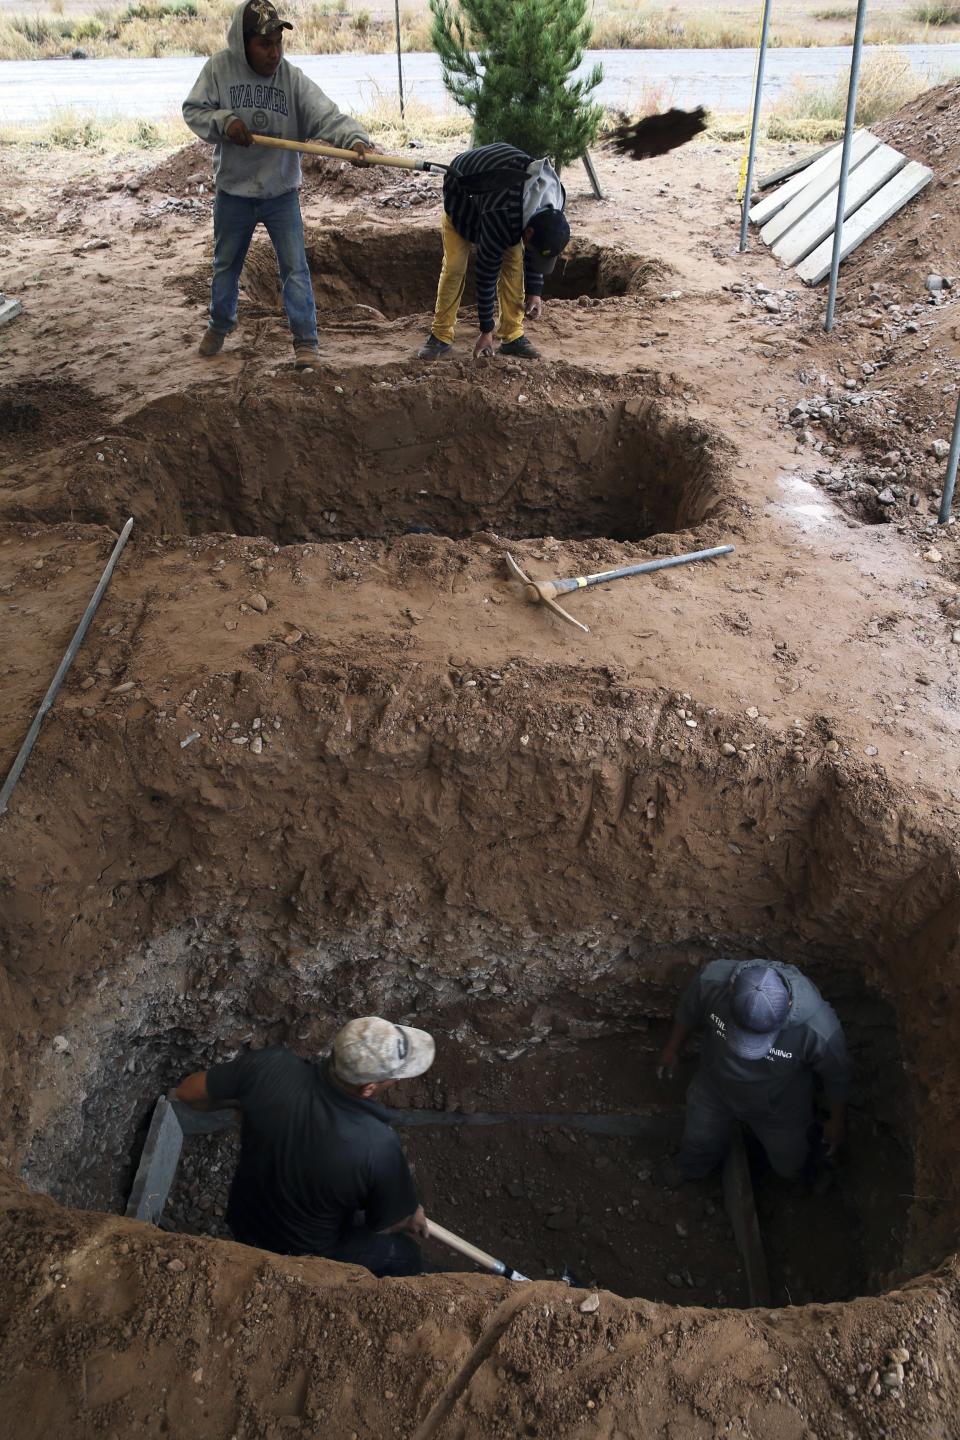 Men dig graves for Rhonita Miller, 30, and four of her young children Krystal and Howard, and twins Titus and Tiana, who were murdered by drug cartel gunmen, before their burial at a cemetery in LeBaron, Chihuahua state, Mexico, Friday, Nov. 8, 2019. A total of three women and six of their children, from the extended LeBaron family, were gunned down in a cartel ambush while traveling along Mexico's Chihuahua and Sonora state border on Monday. (AP Photo/Marco Ugarte)